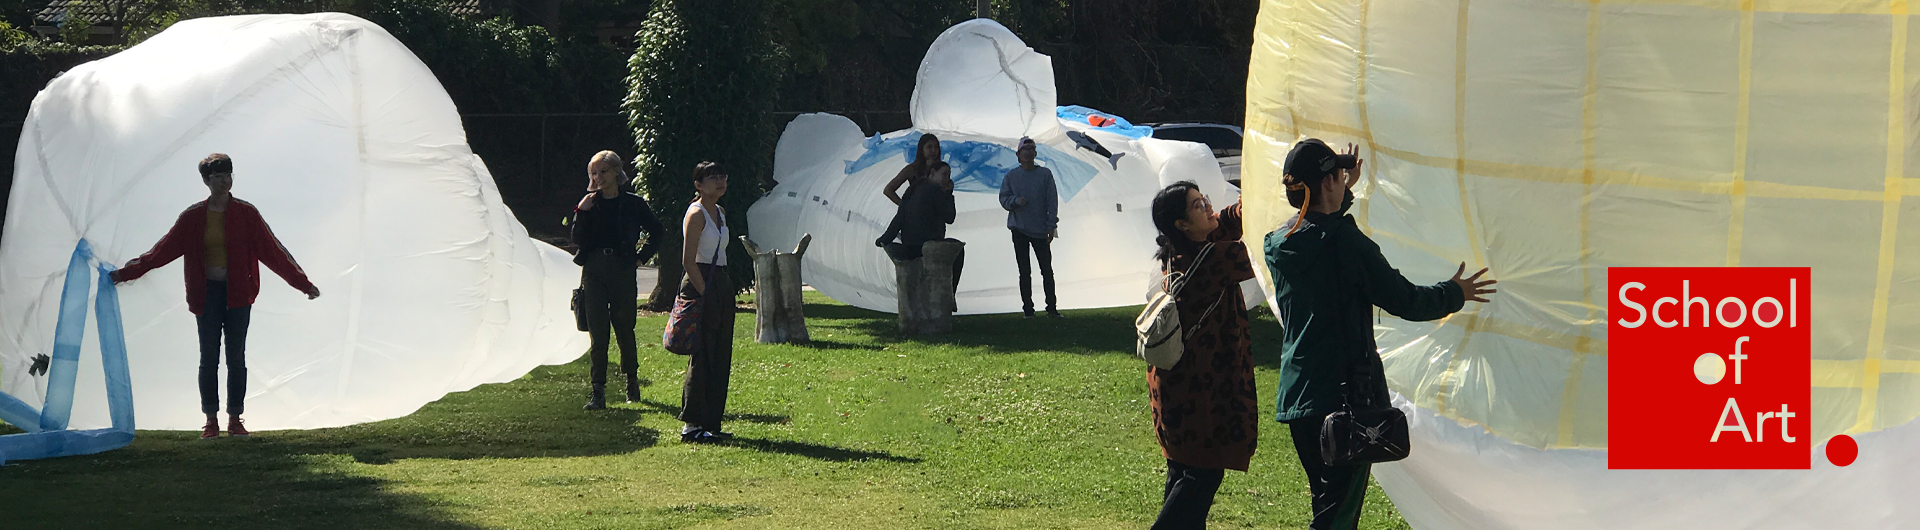 People interacting with 3D inflatable sculptures in an outdoor exhibit